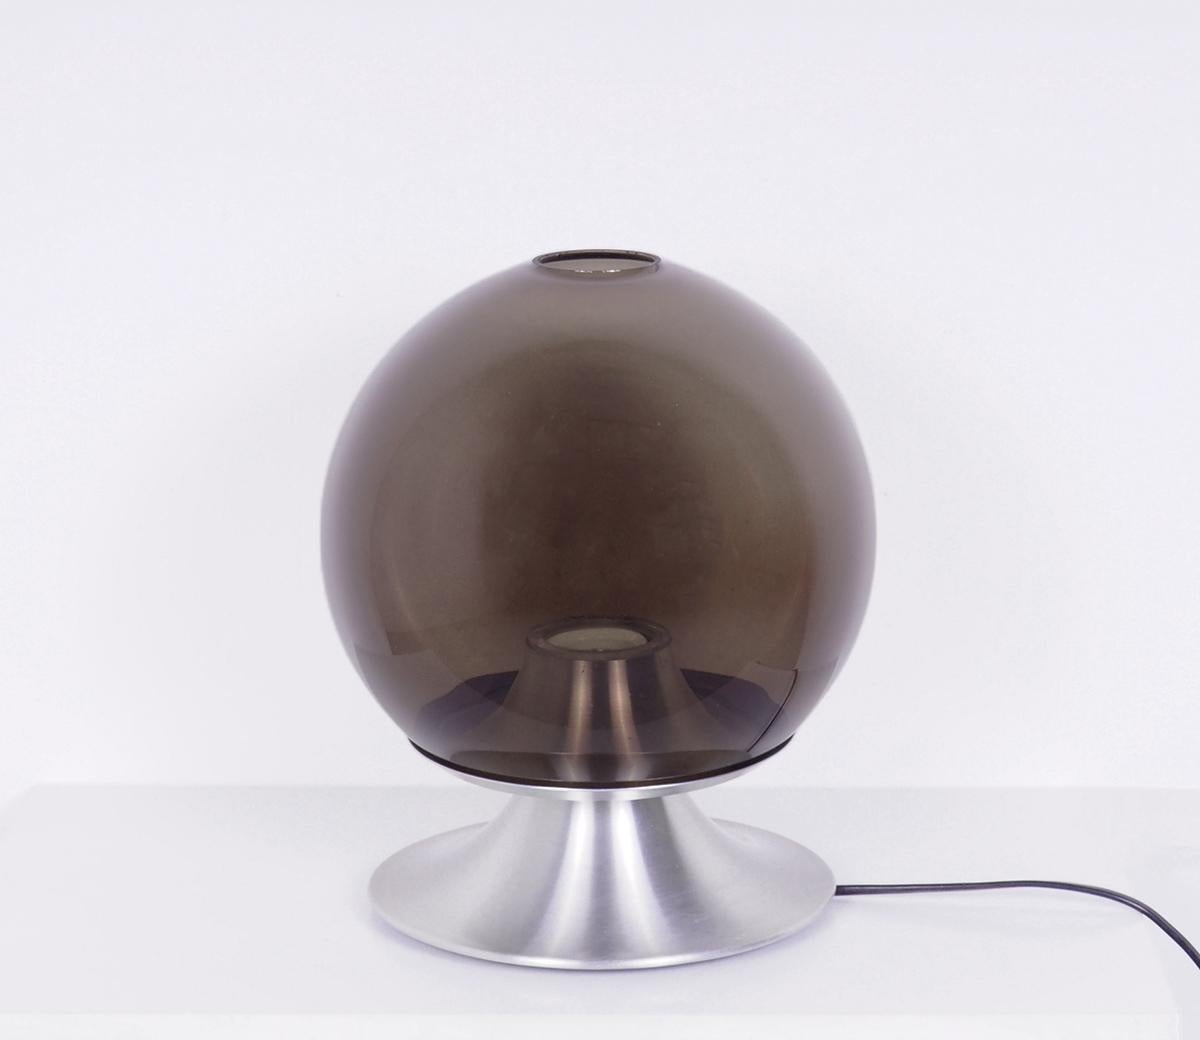 Beautiful iconic table lamp produced by Raak Amsterdam.

Model D-2001 Dream Island designed by Frank Ligtelijn in the 1960s.

The lamp has a round shade of brown-grey smoked glass that rests on an aluminum base.

Very atmospheric lamp, especially